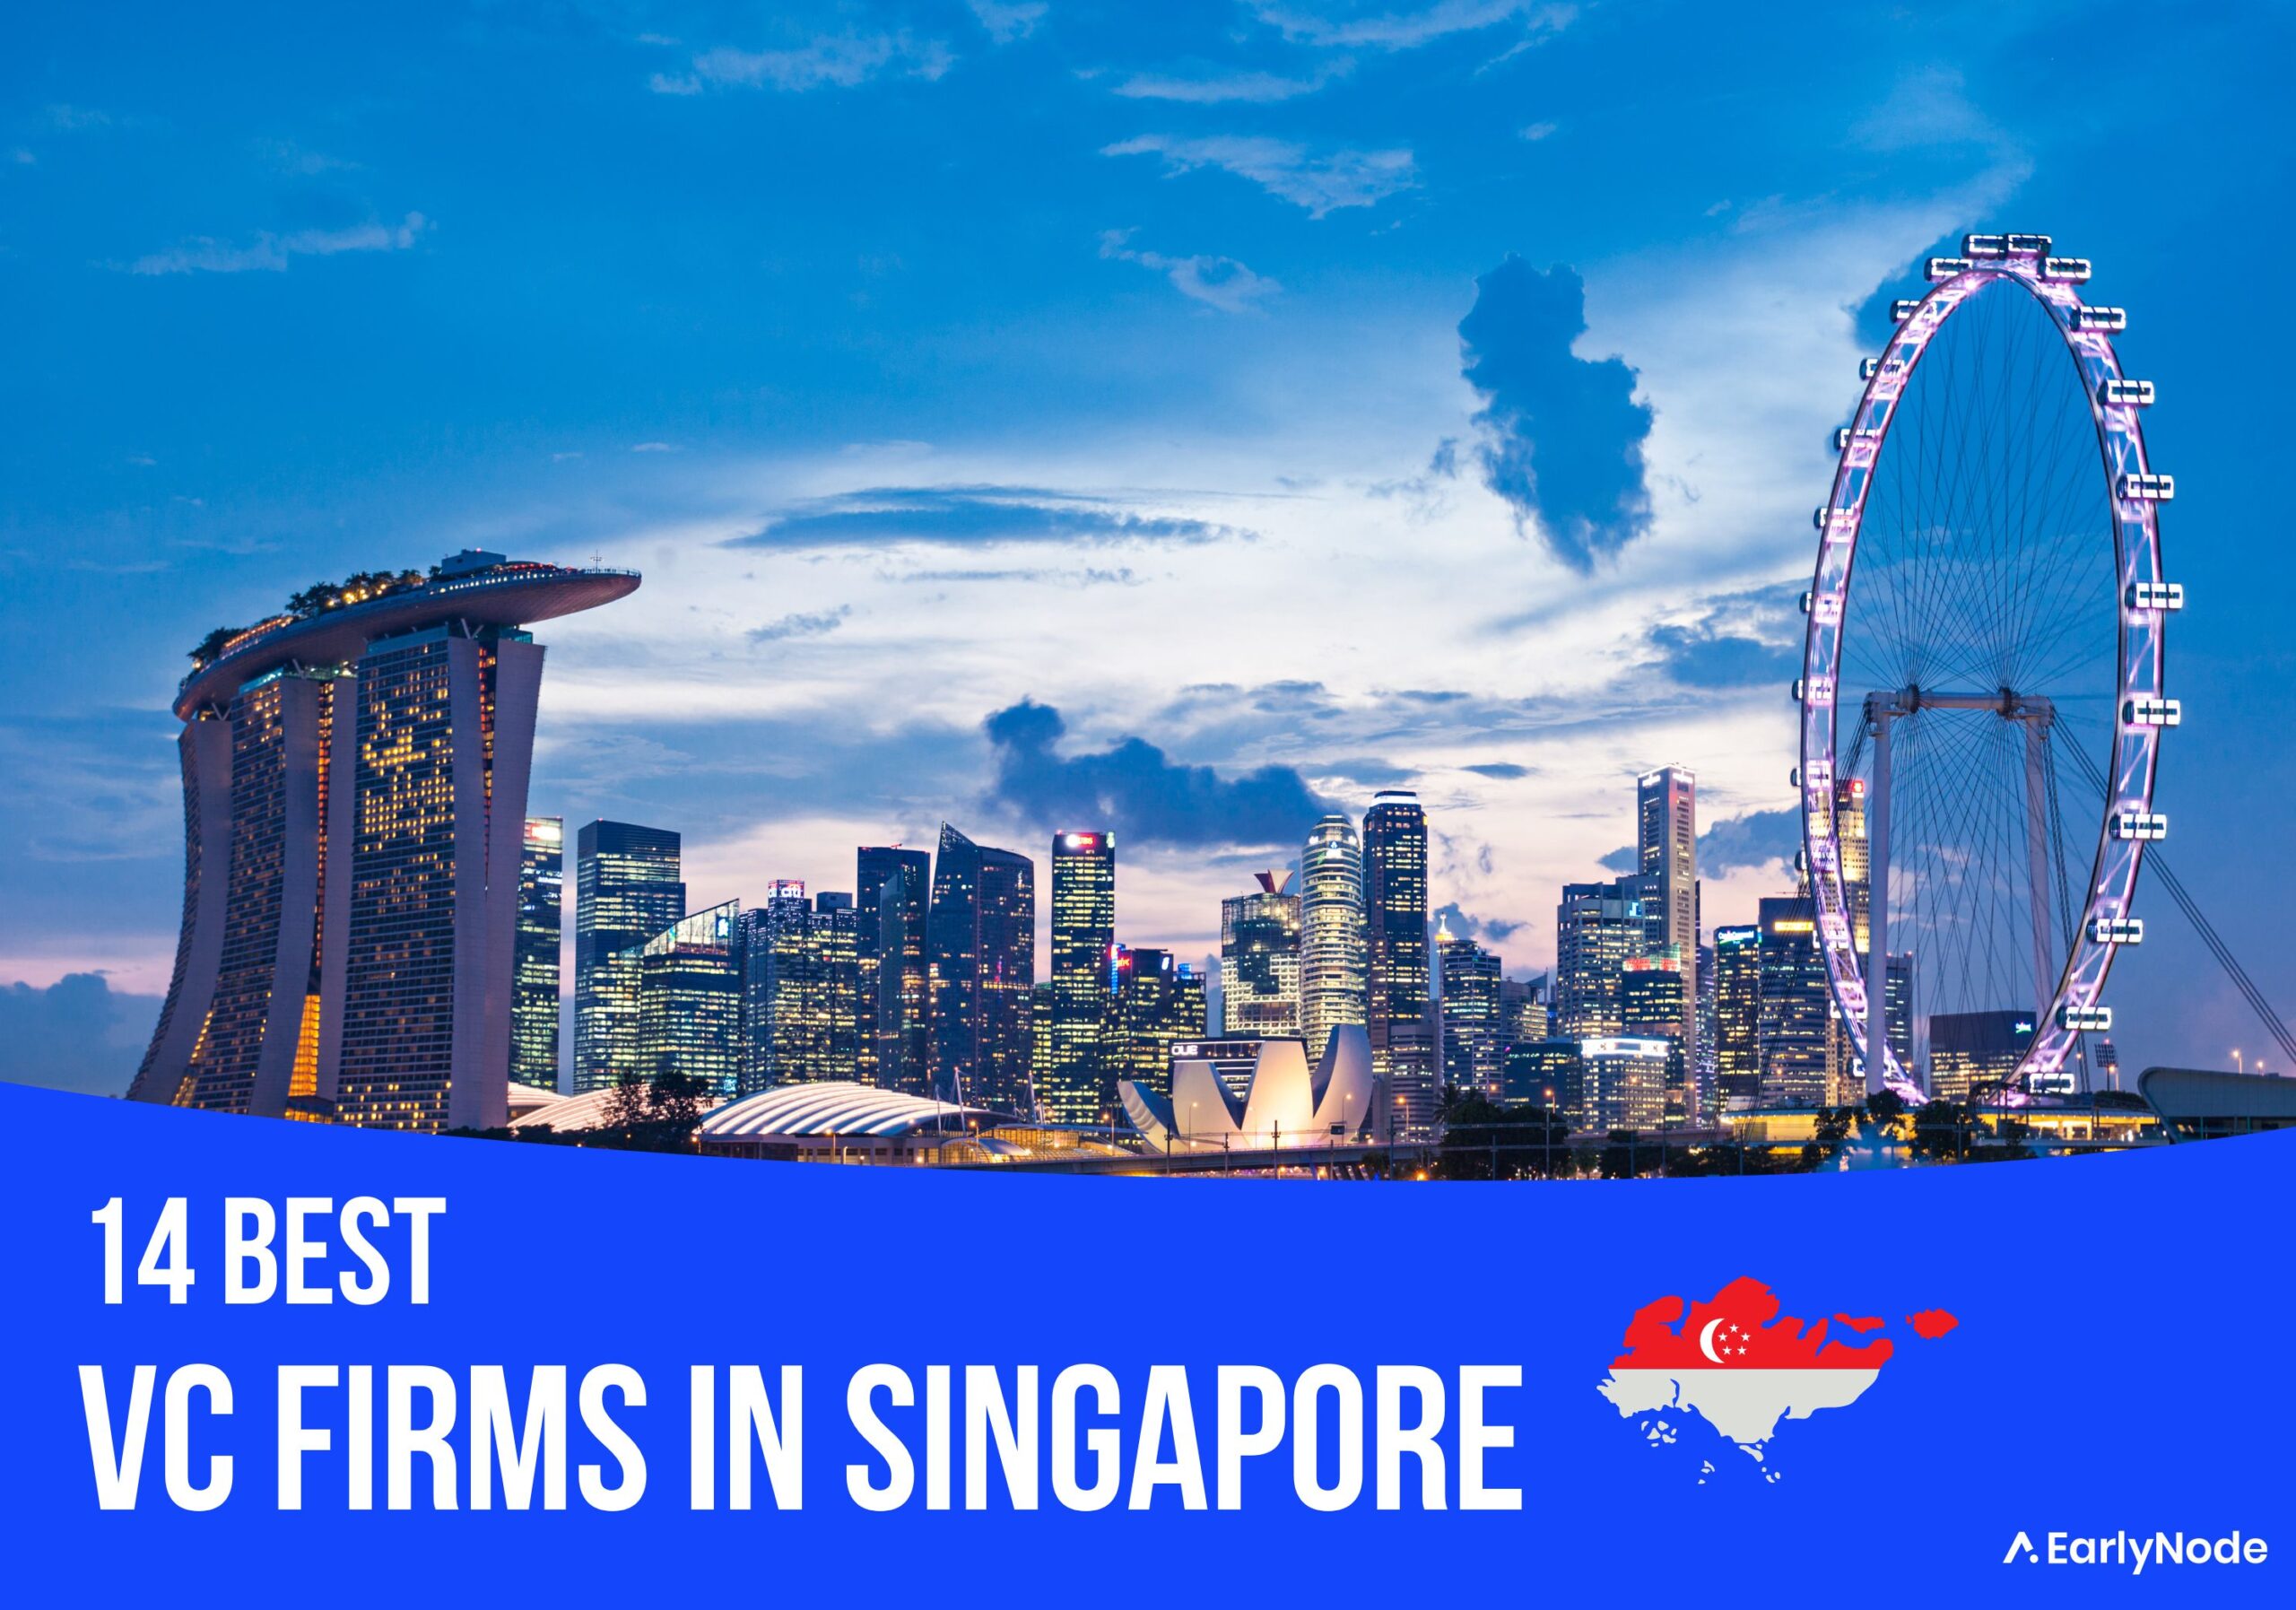 14 BEST Venture Capital (VC) Firms in Singapore